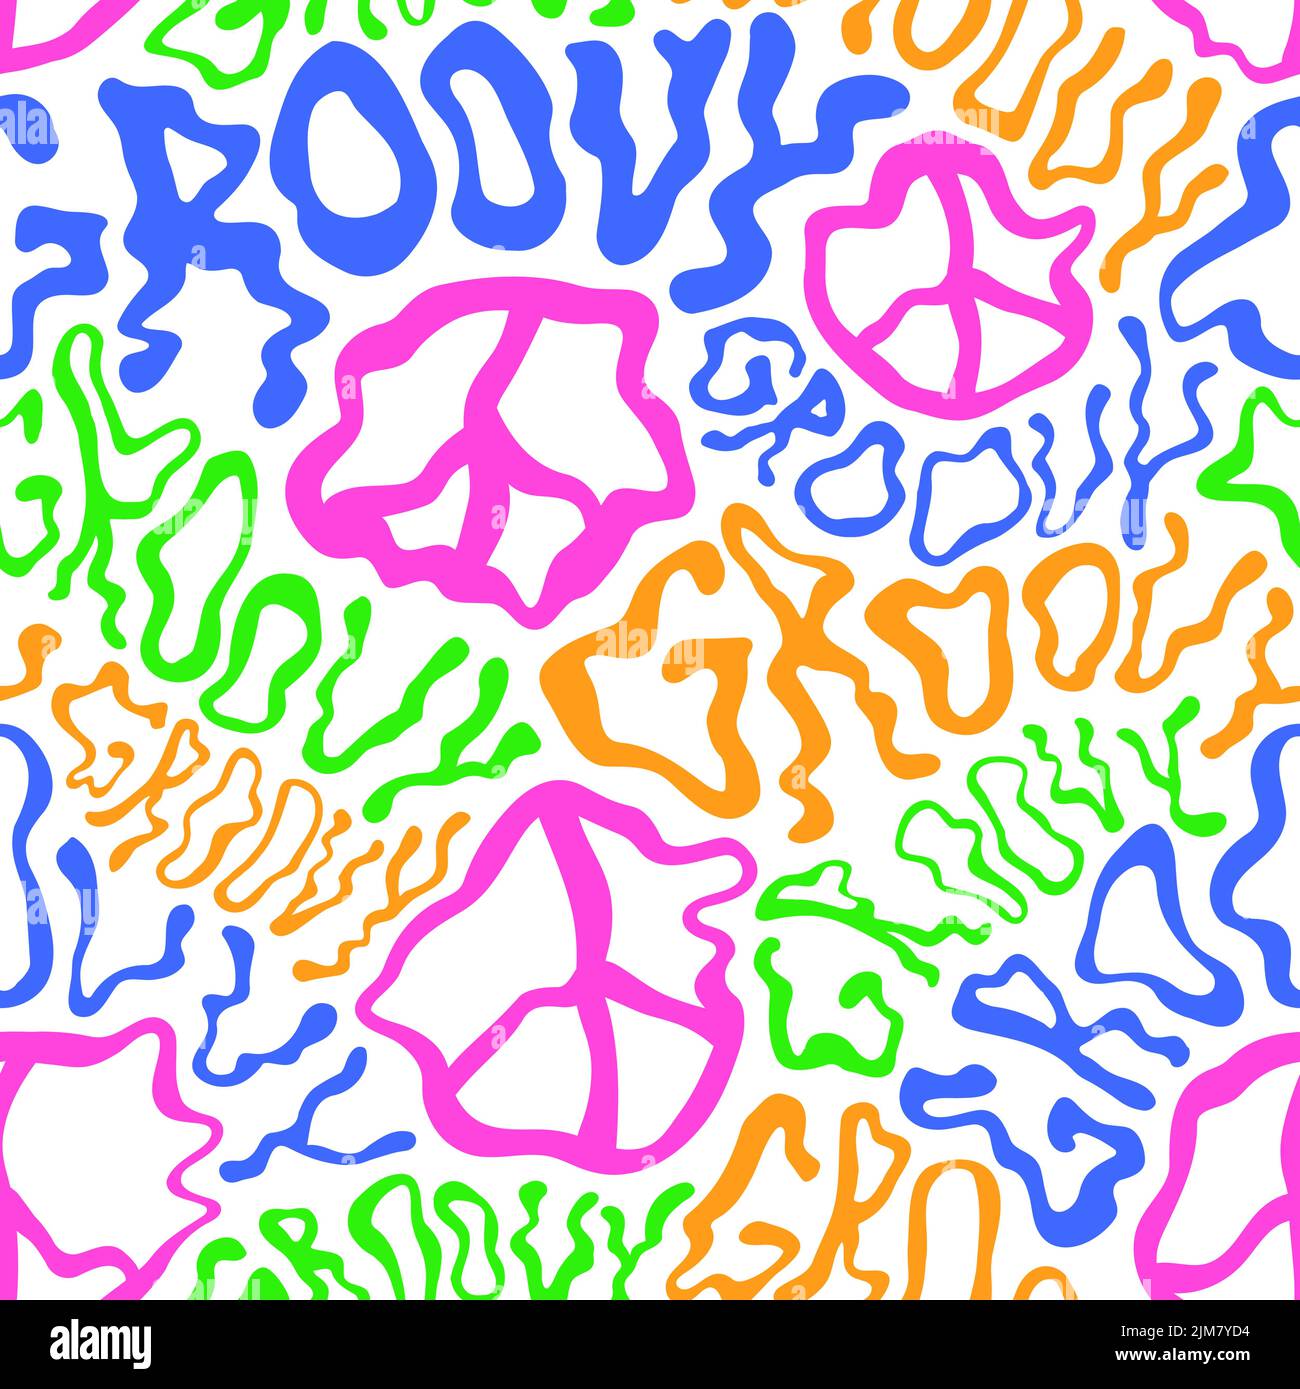 Deformed wavy groovy word and peace sign seamless pattern wallpaper.Vector graphic character illustration.Groovy,trippy lettering,lsd,acid,60s,70s,psychedelic seamless pattern wallpaper print concept Stock Vector